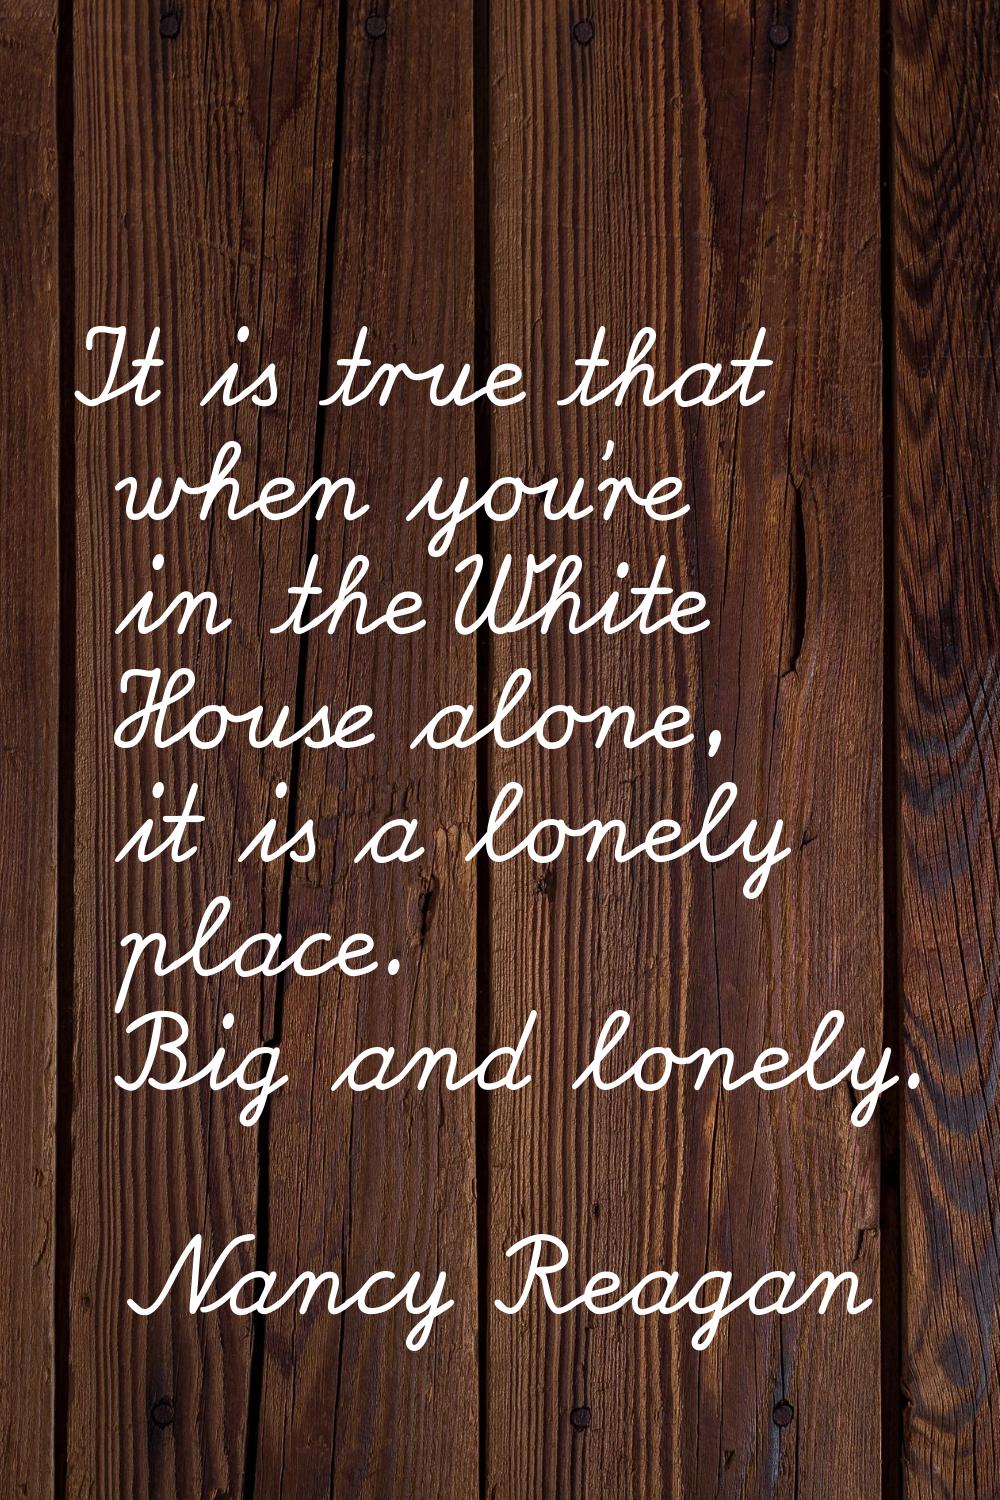 It is true that when you're in the White House alone, it is a lonely place. Big and lonely.